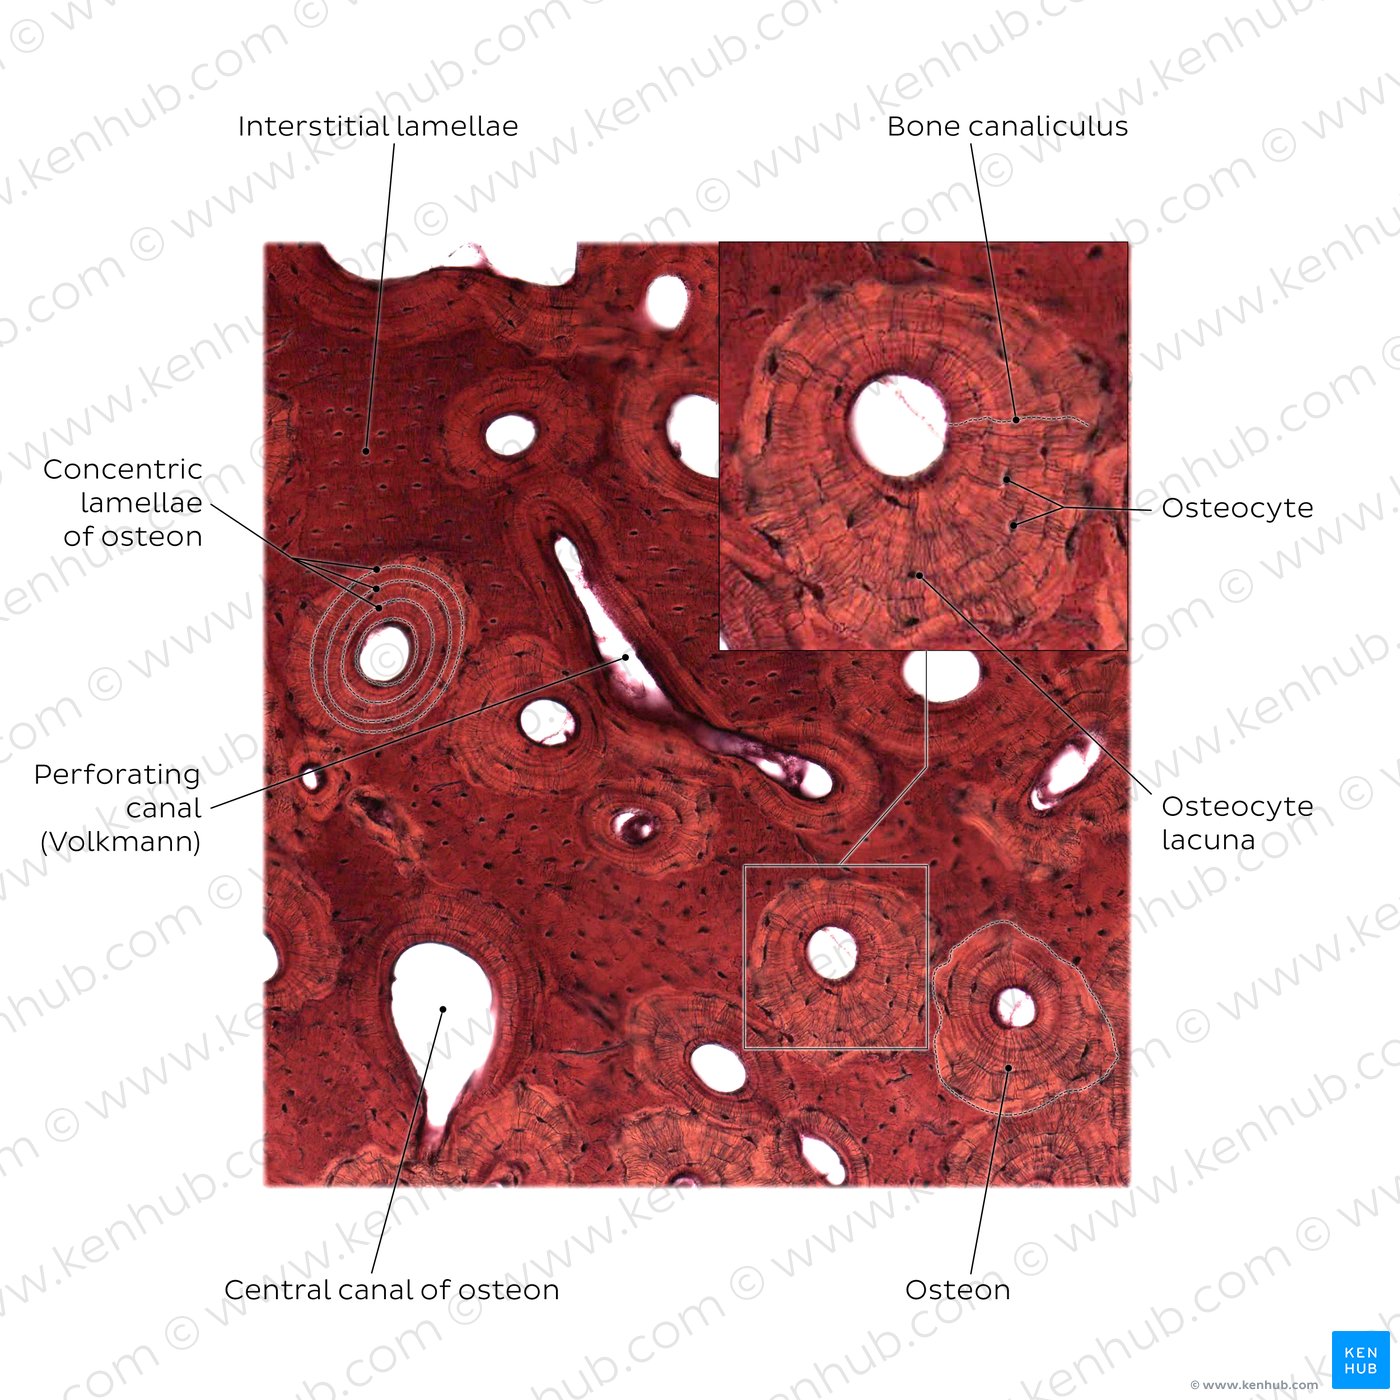 Compact bone. Stain: silver stain. Medium magnification